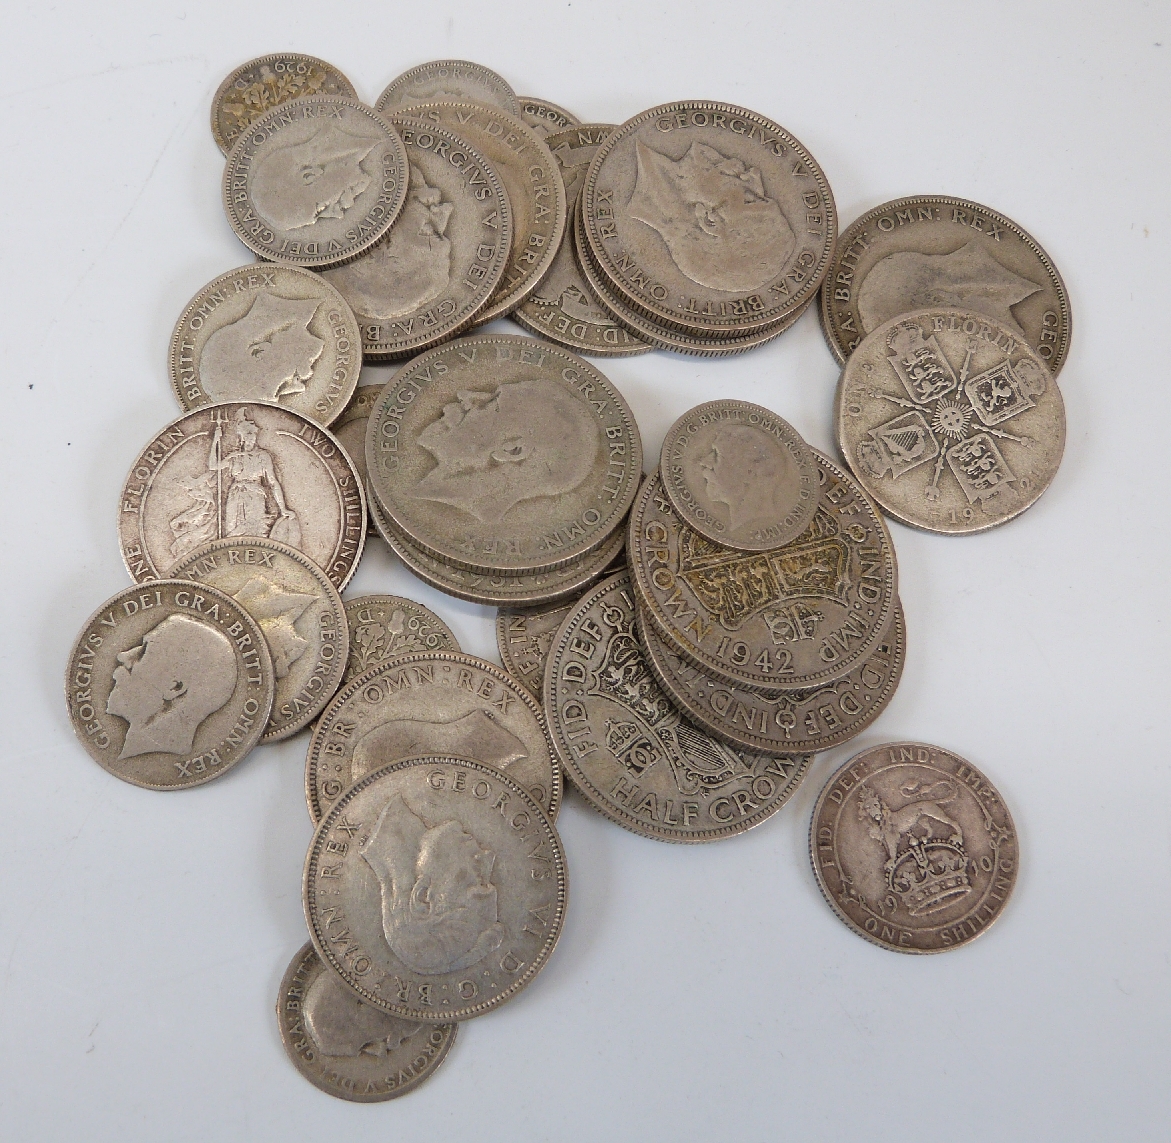 A collection of UK coinage including George III onwards, a large collection of pennies, - Image 3 of 5